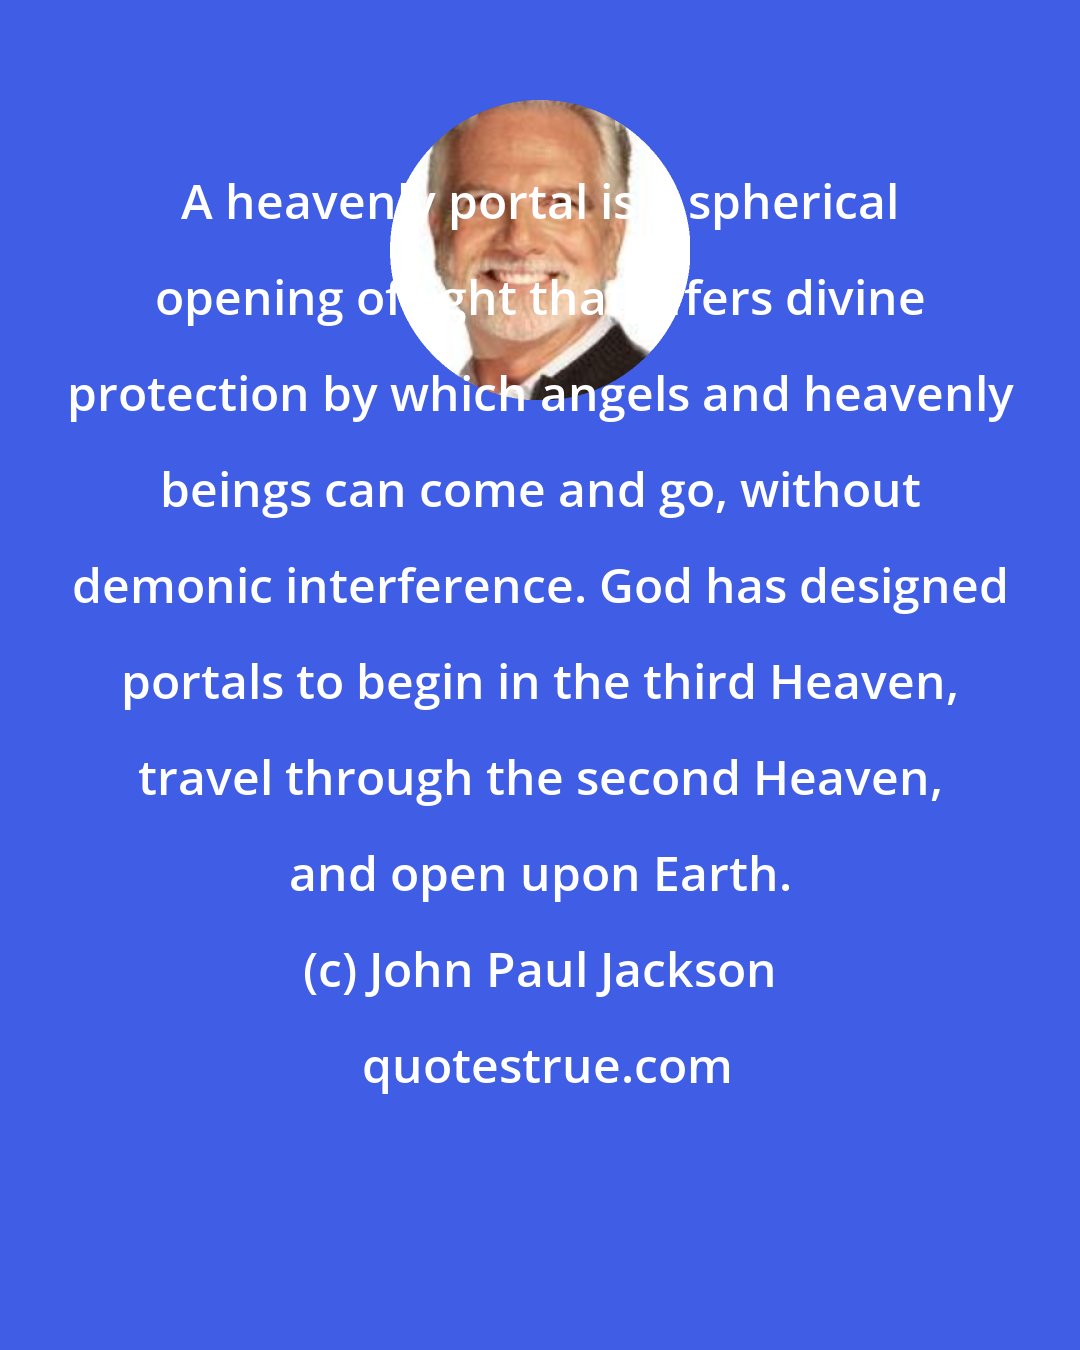 John Paul Jackson: A heavenly portal is a spherical opening of light that offers divine protection by which angels and heavenly beings can come and go, without demonic interference. God has designed portals to begin in the third Heaven, travel through the second Heaven, and open upon Earth.